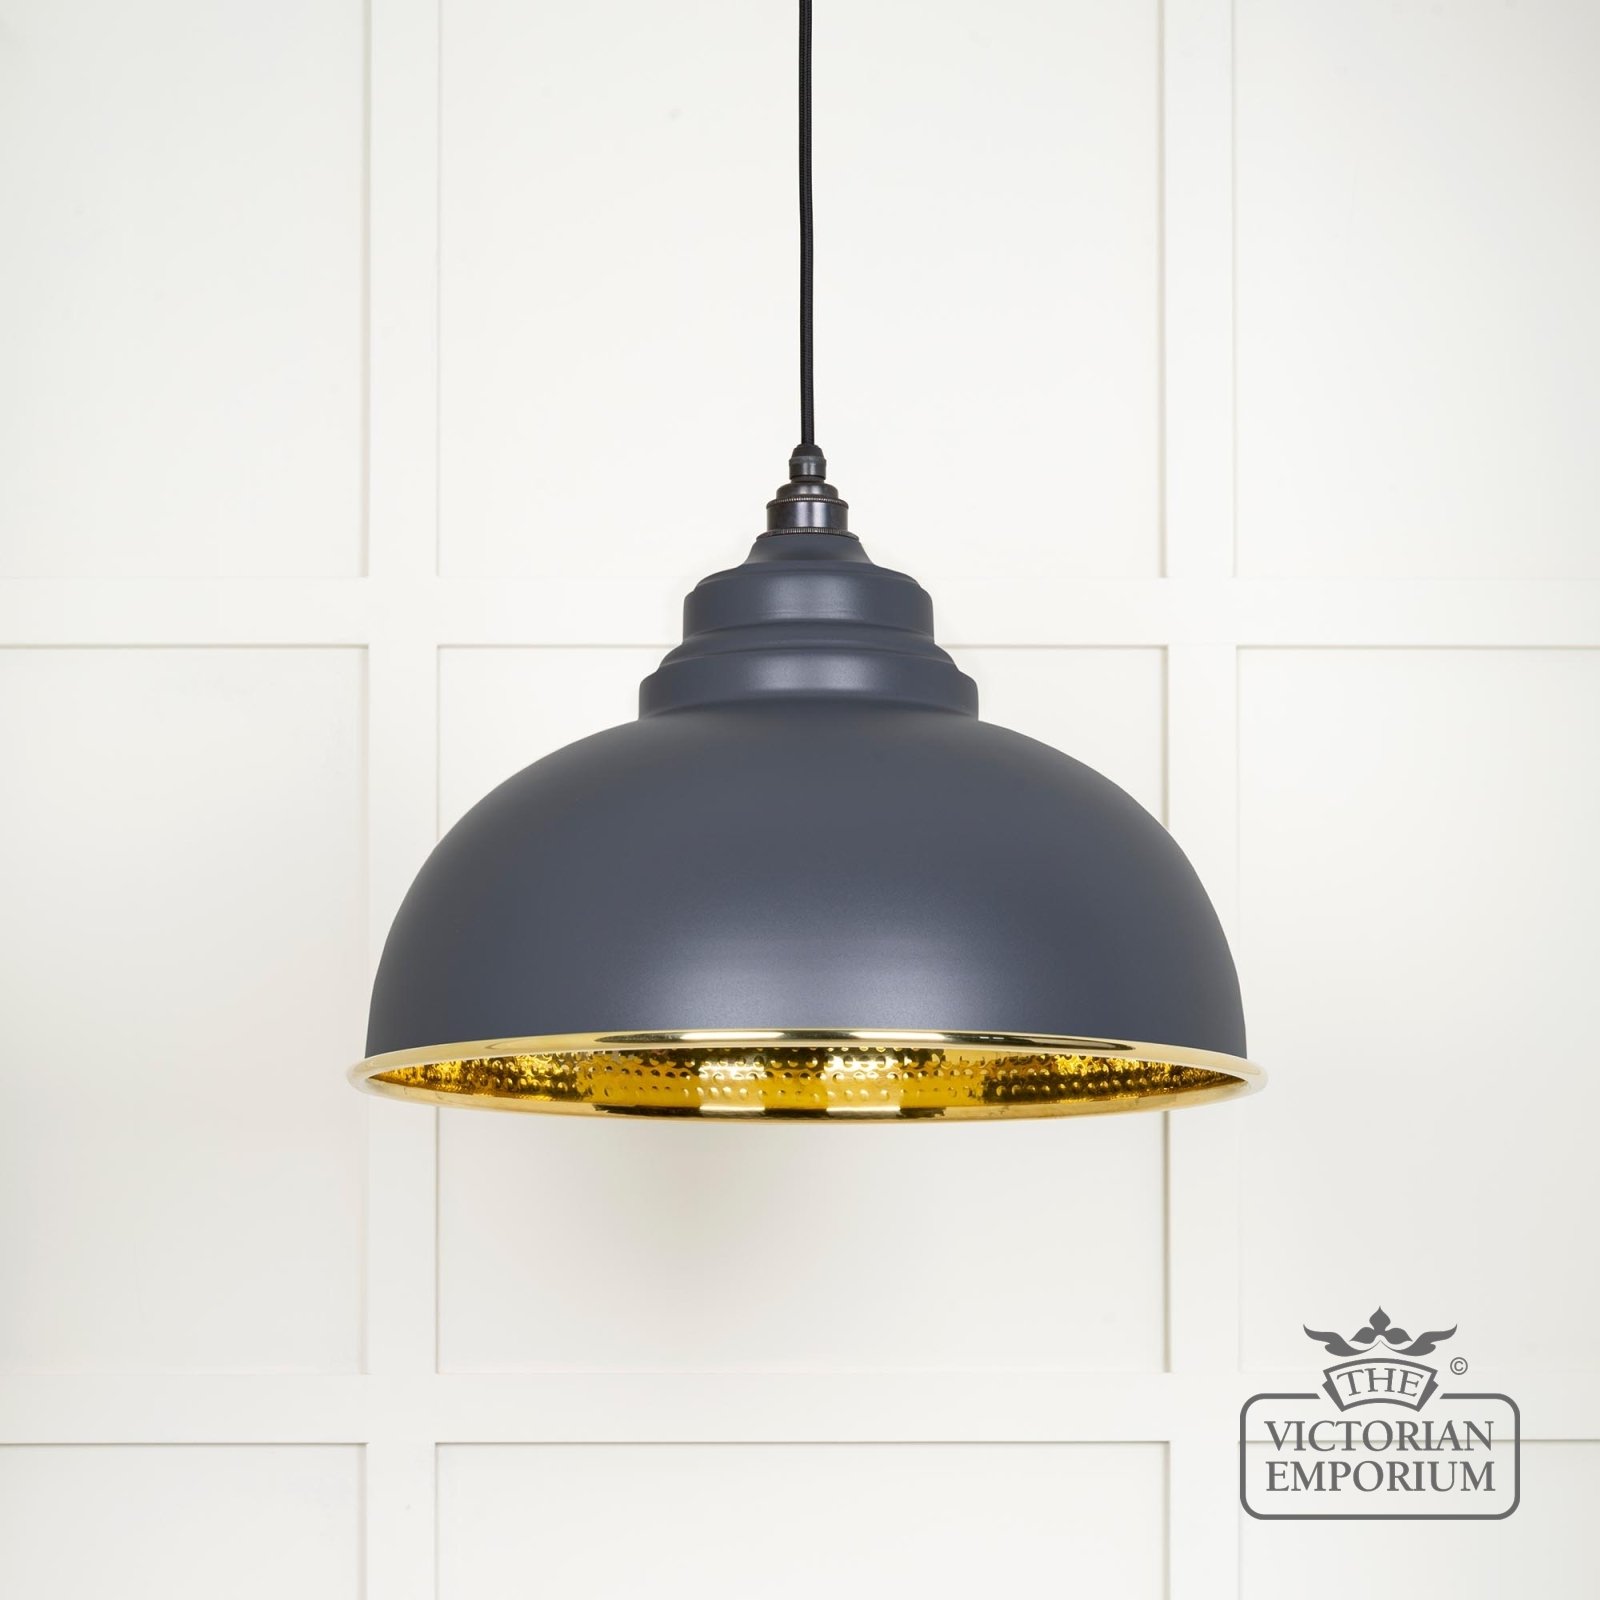 Harlow pendant light in hammered brass with painted Slate exterior